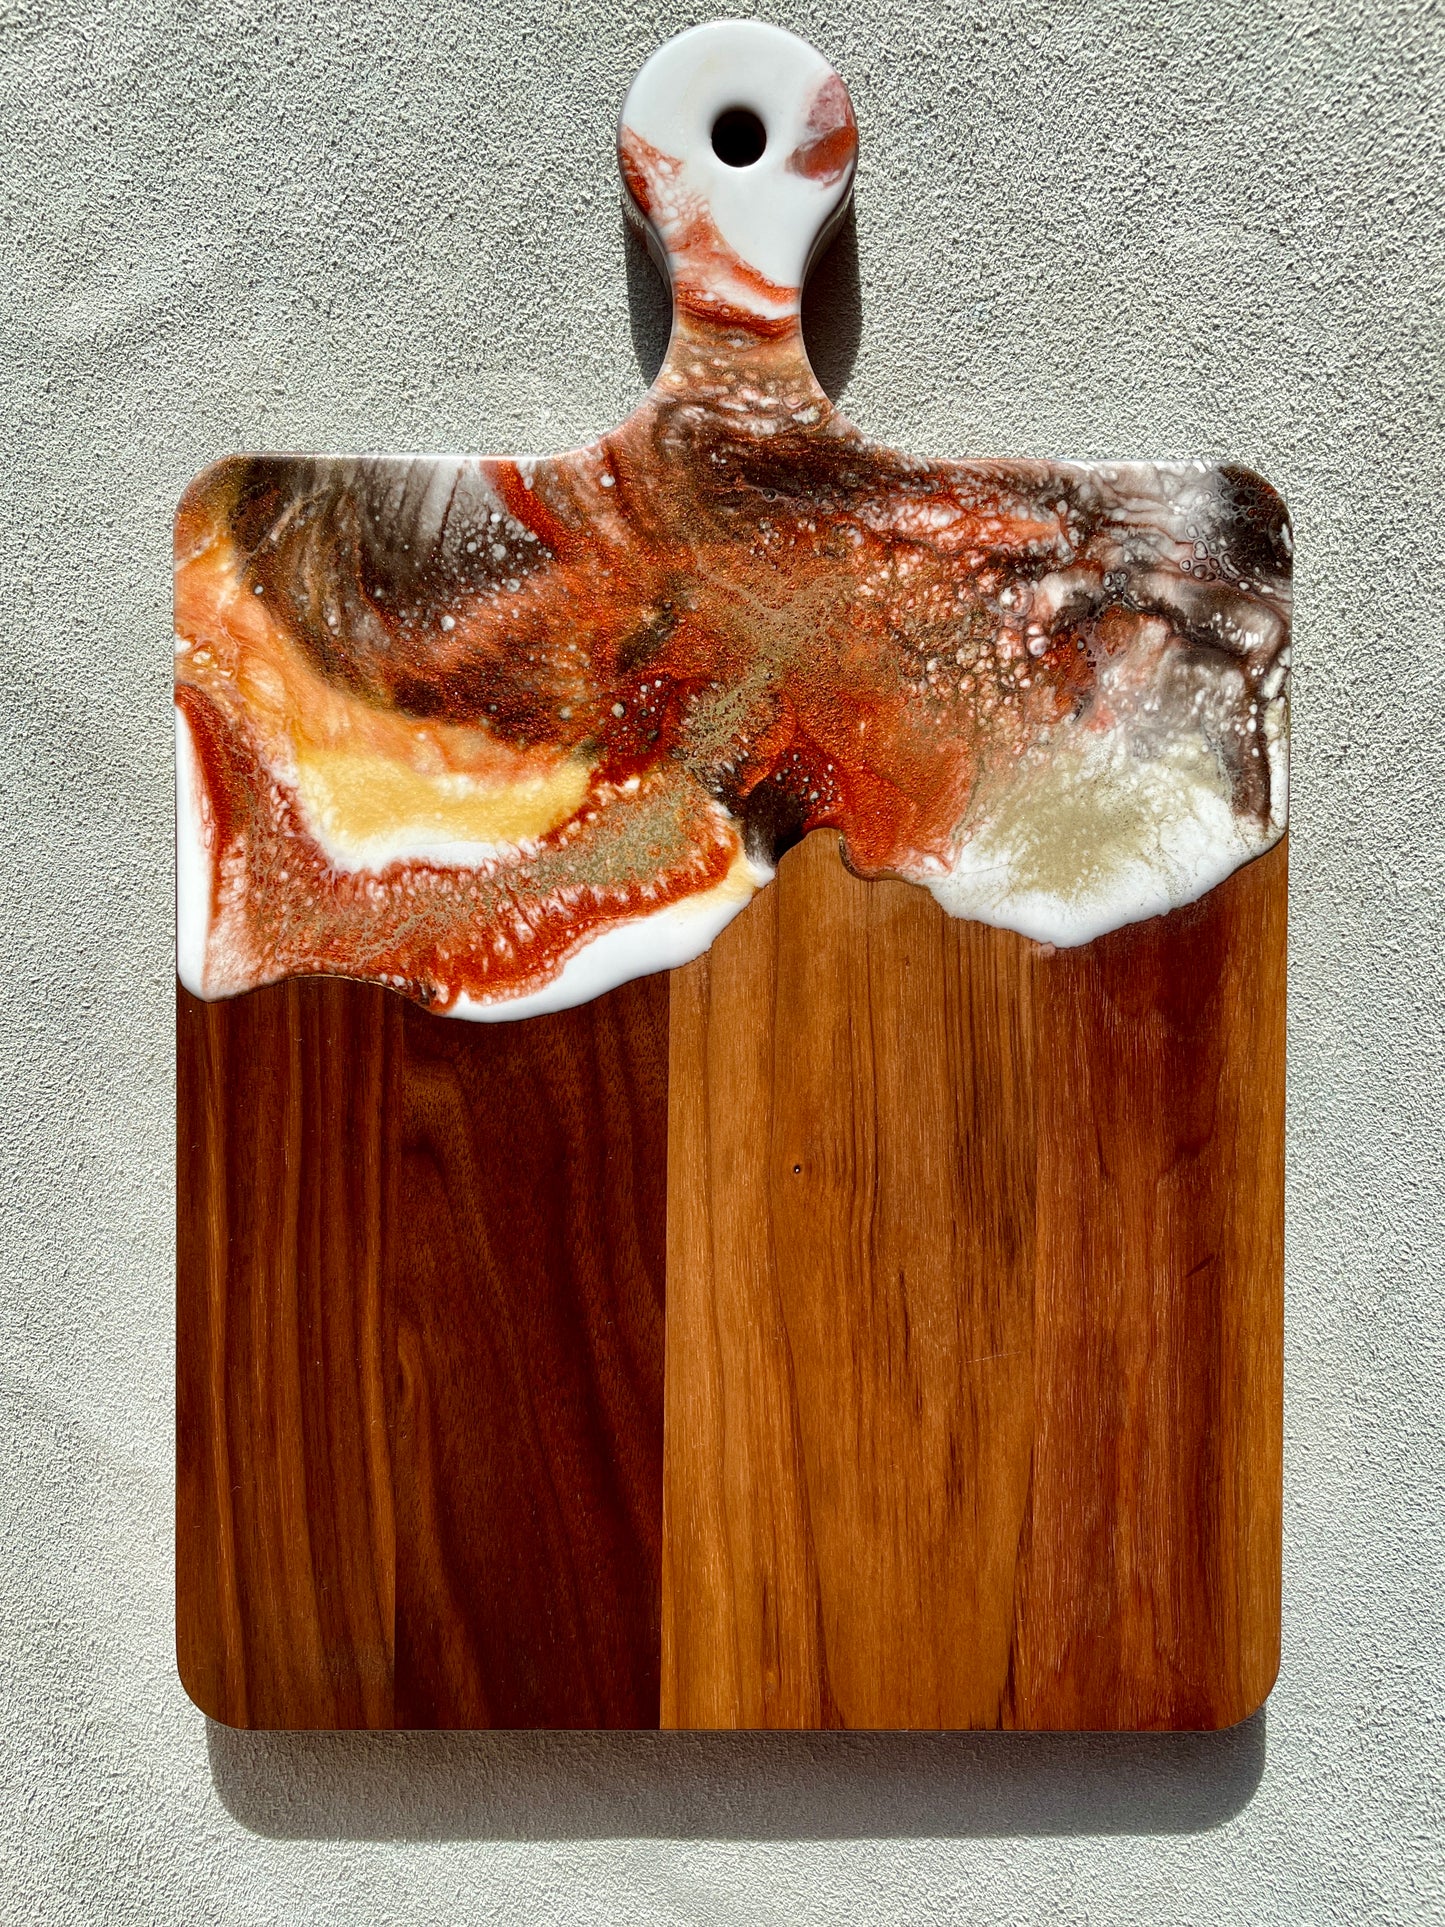 Walnut Artisan Cheese Board / Handle Artist: Marcy Knotwell  Copper penny, white, brown and liquid gold lacing resin design  You will not be disappointed with the quality of this product! Our handcrafted wood grained-edge charcuterie cheese boards are the answer to stylish, multi-functional, sustainable serve-ware.  When not in use, this charcuterie cheese board makes a beautiful addition to your countertop or gallery wall.